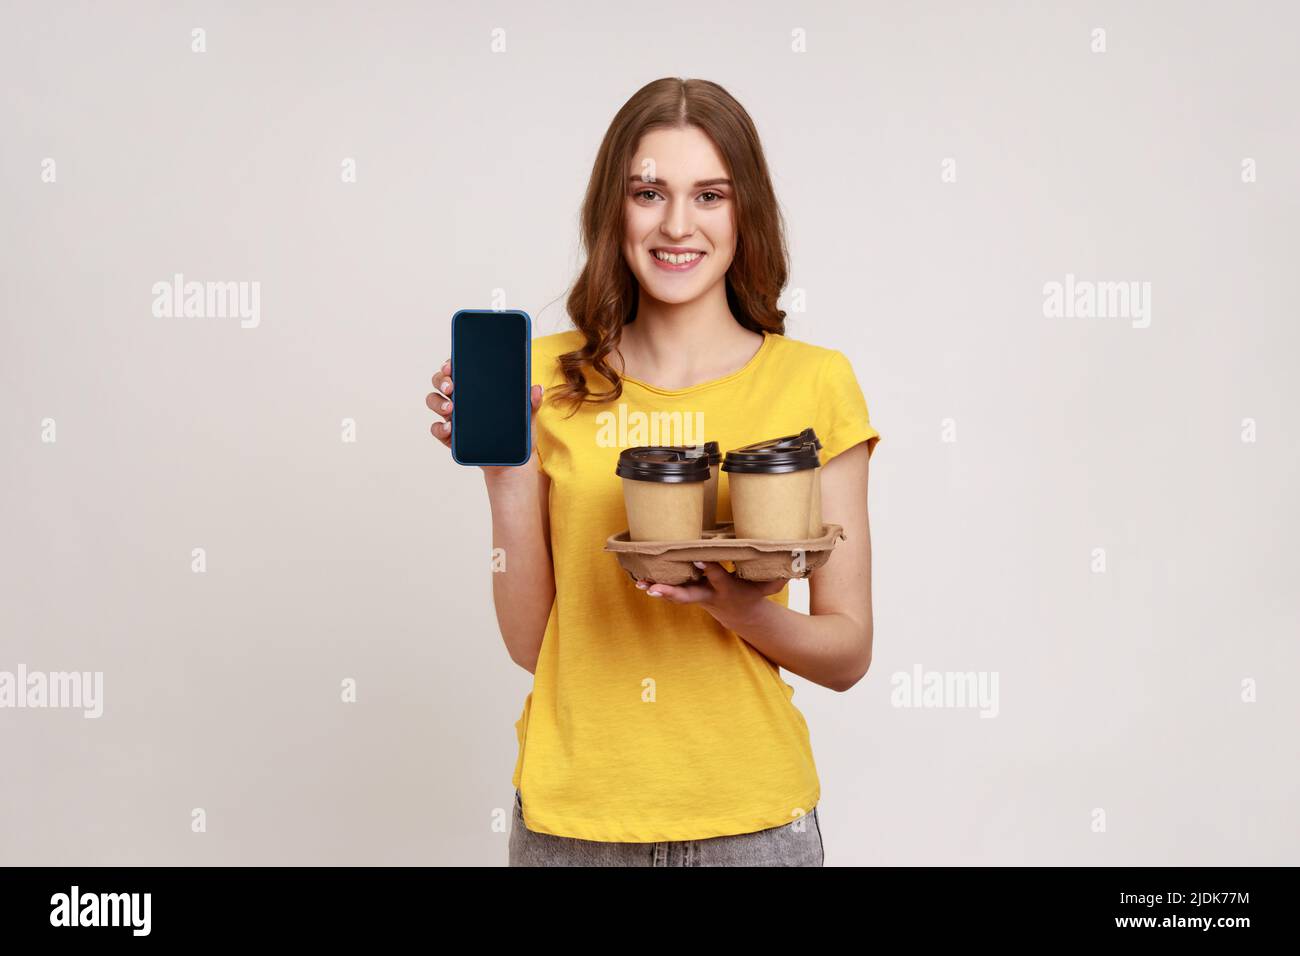 Positive smiling teenager girl with brown hair in yellow t-shirt holding empty display smartphone and holder with coffee paper cups, online order. Indoor studio shot isolated on gray background. Stock Photo